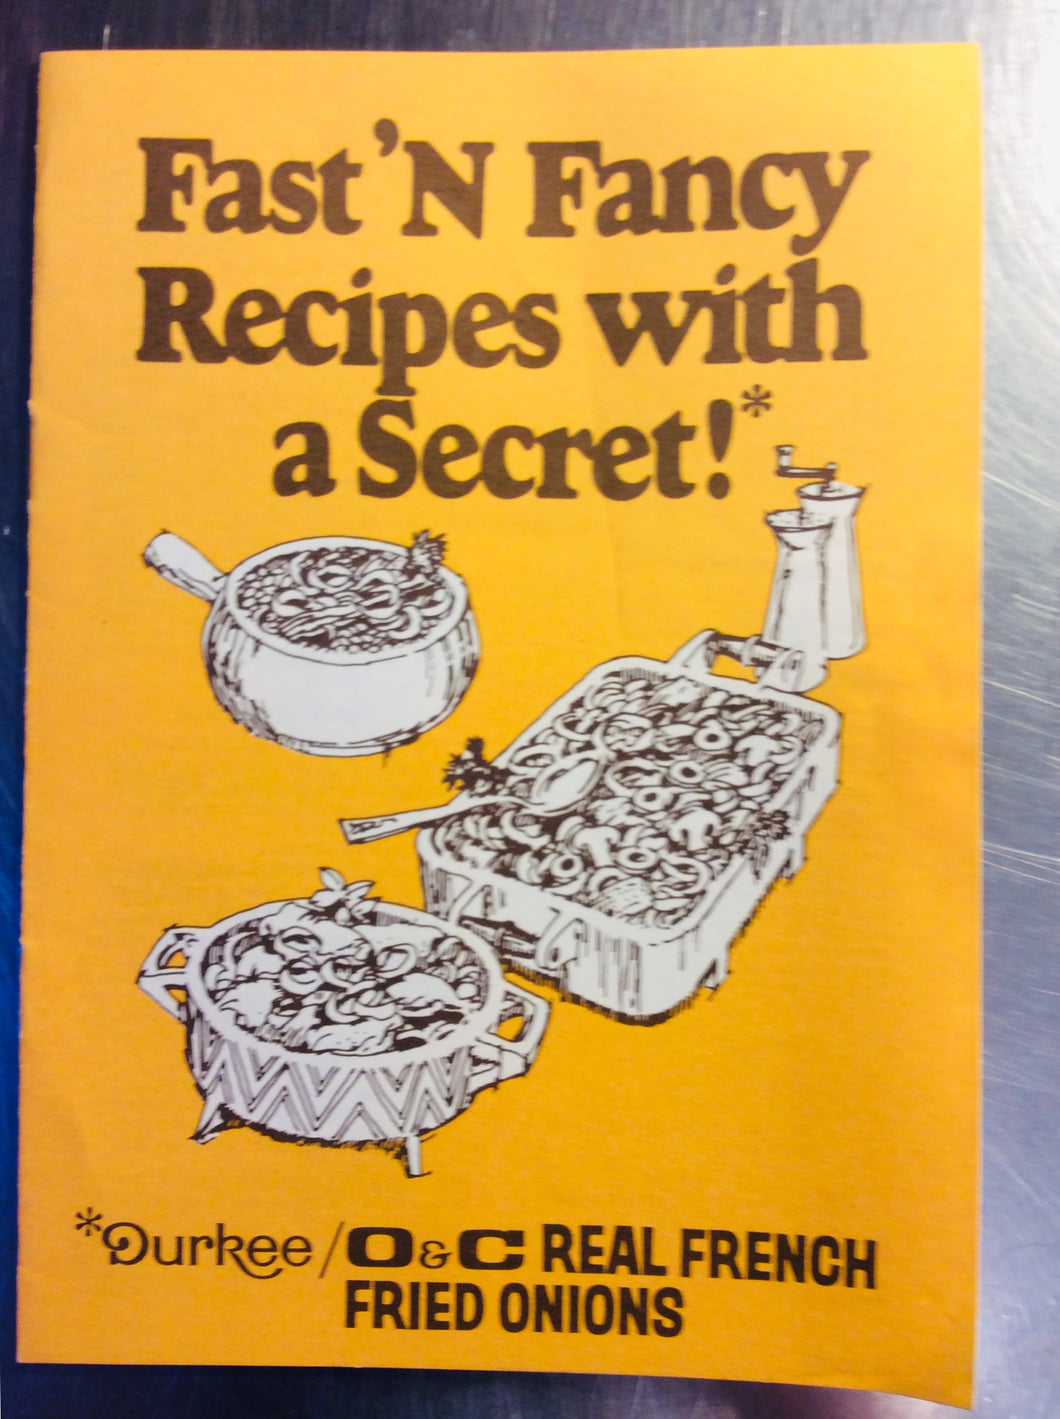 Fast 'N Fancy Recipes with a Secret by Durkee